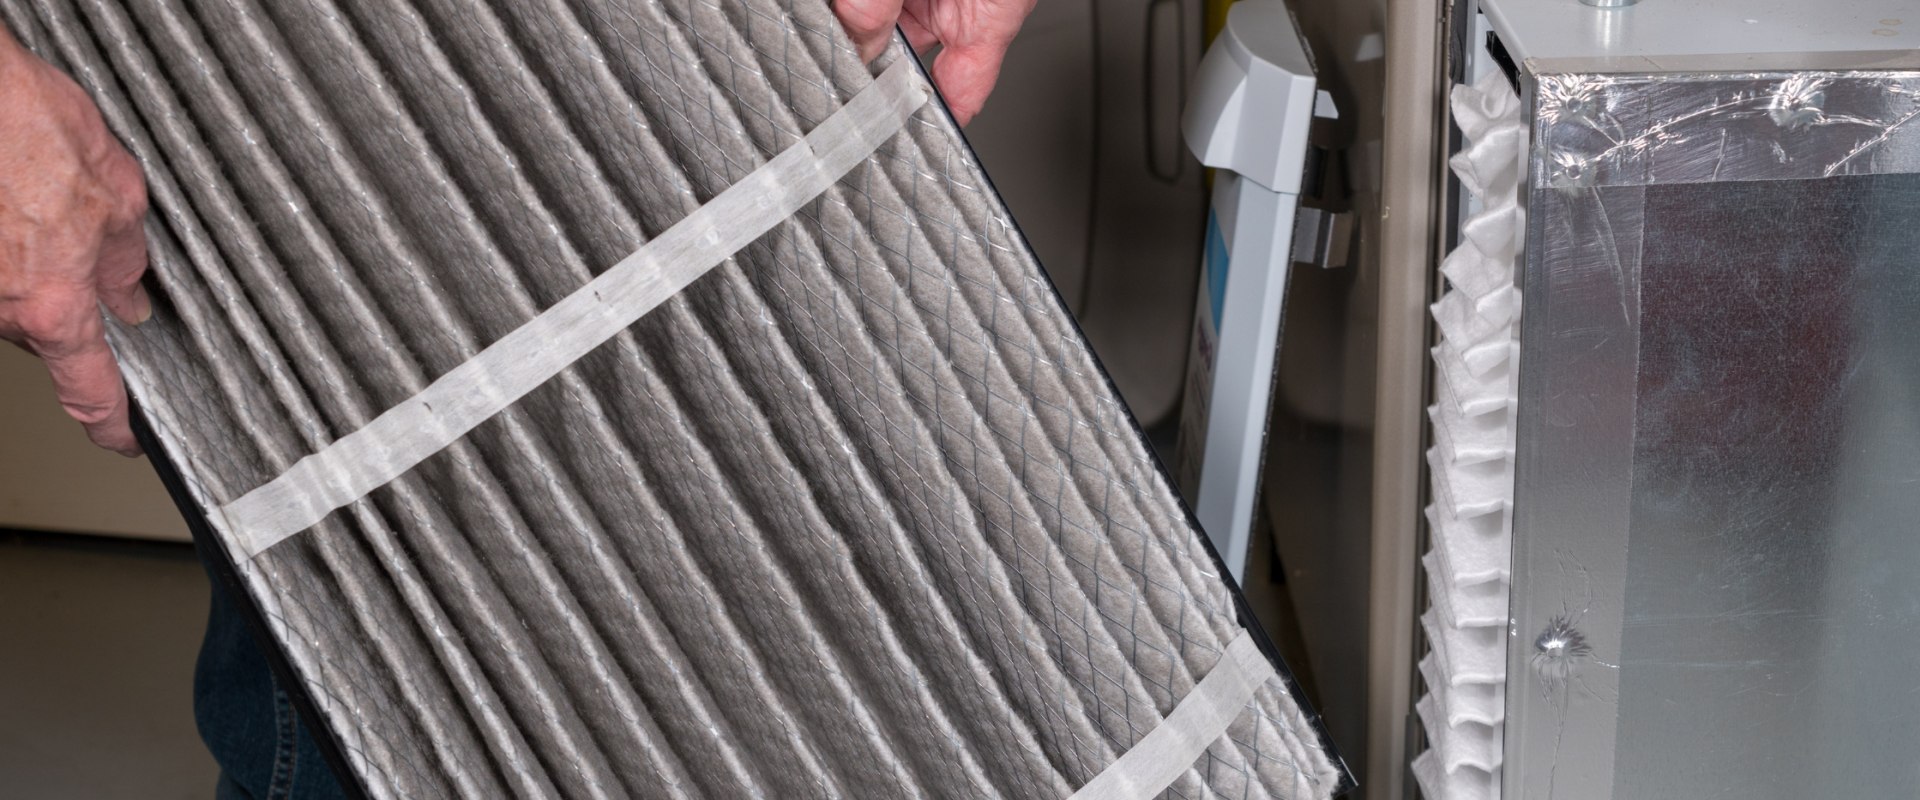 Do All Furnaces Need Different Size Filters?